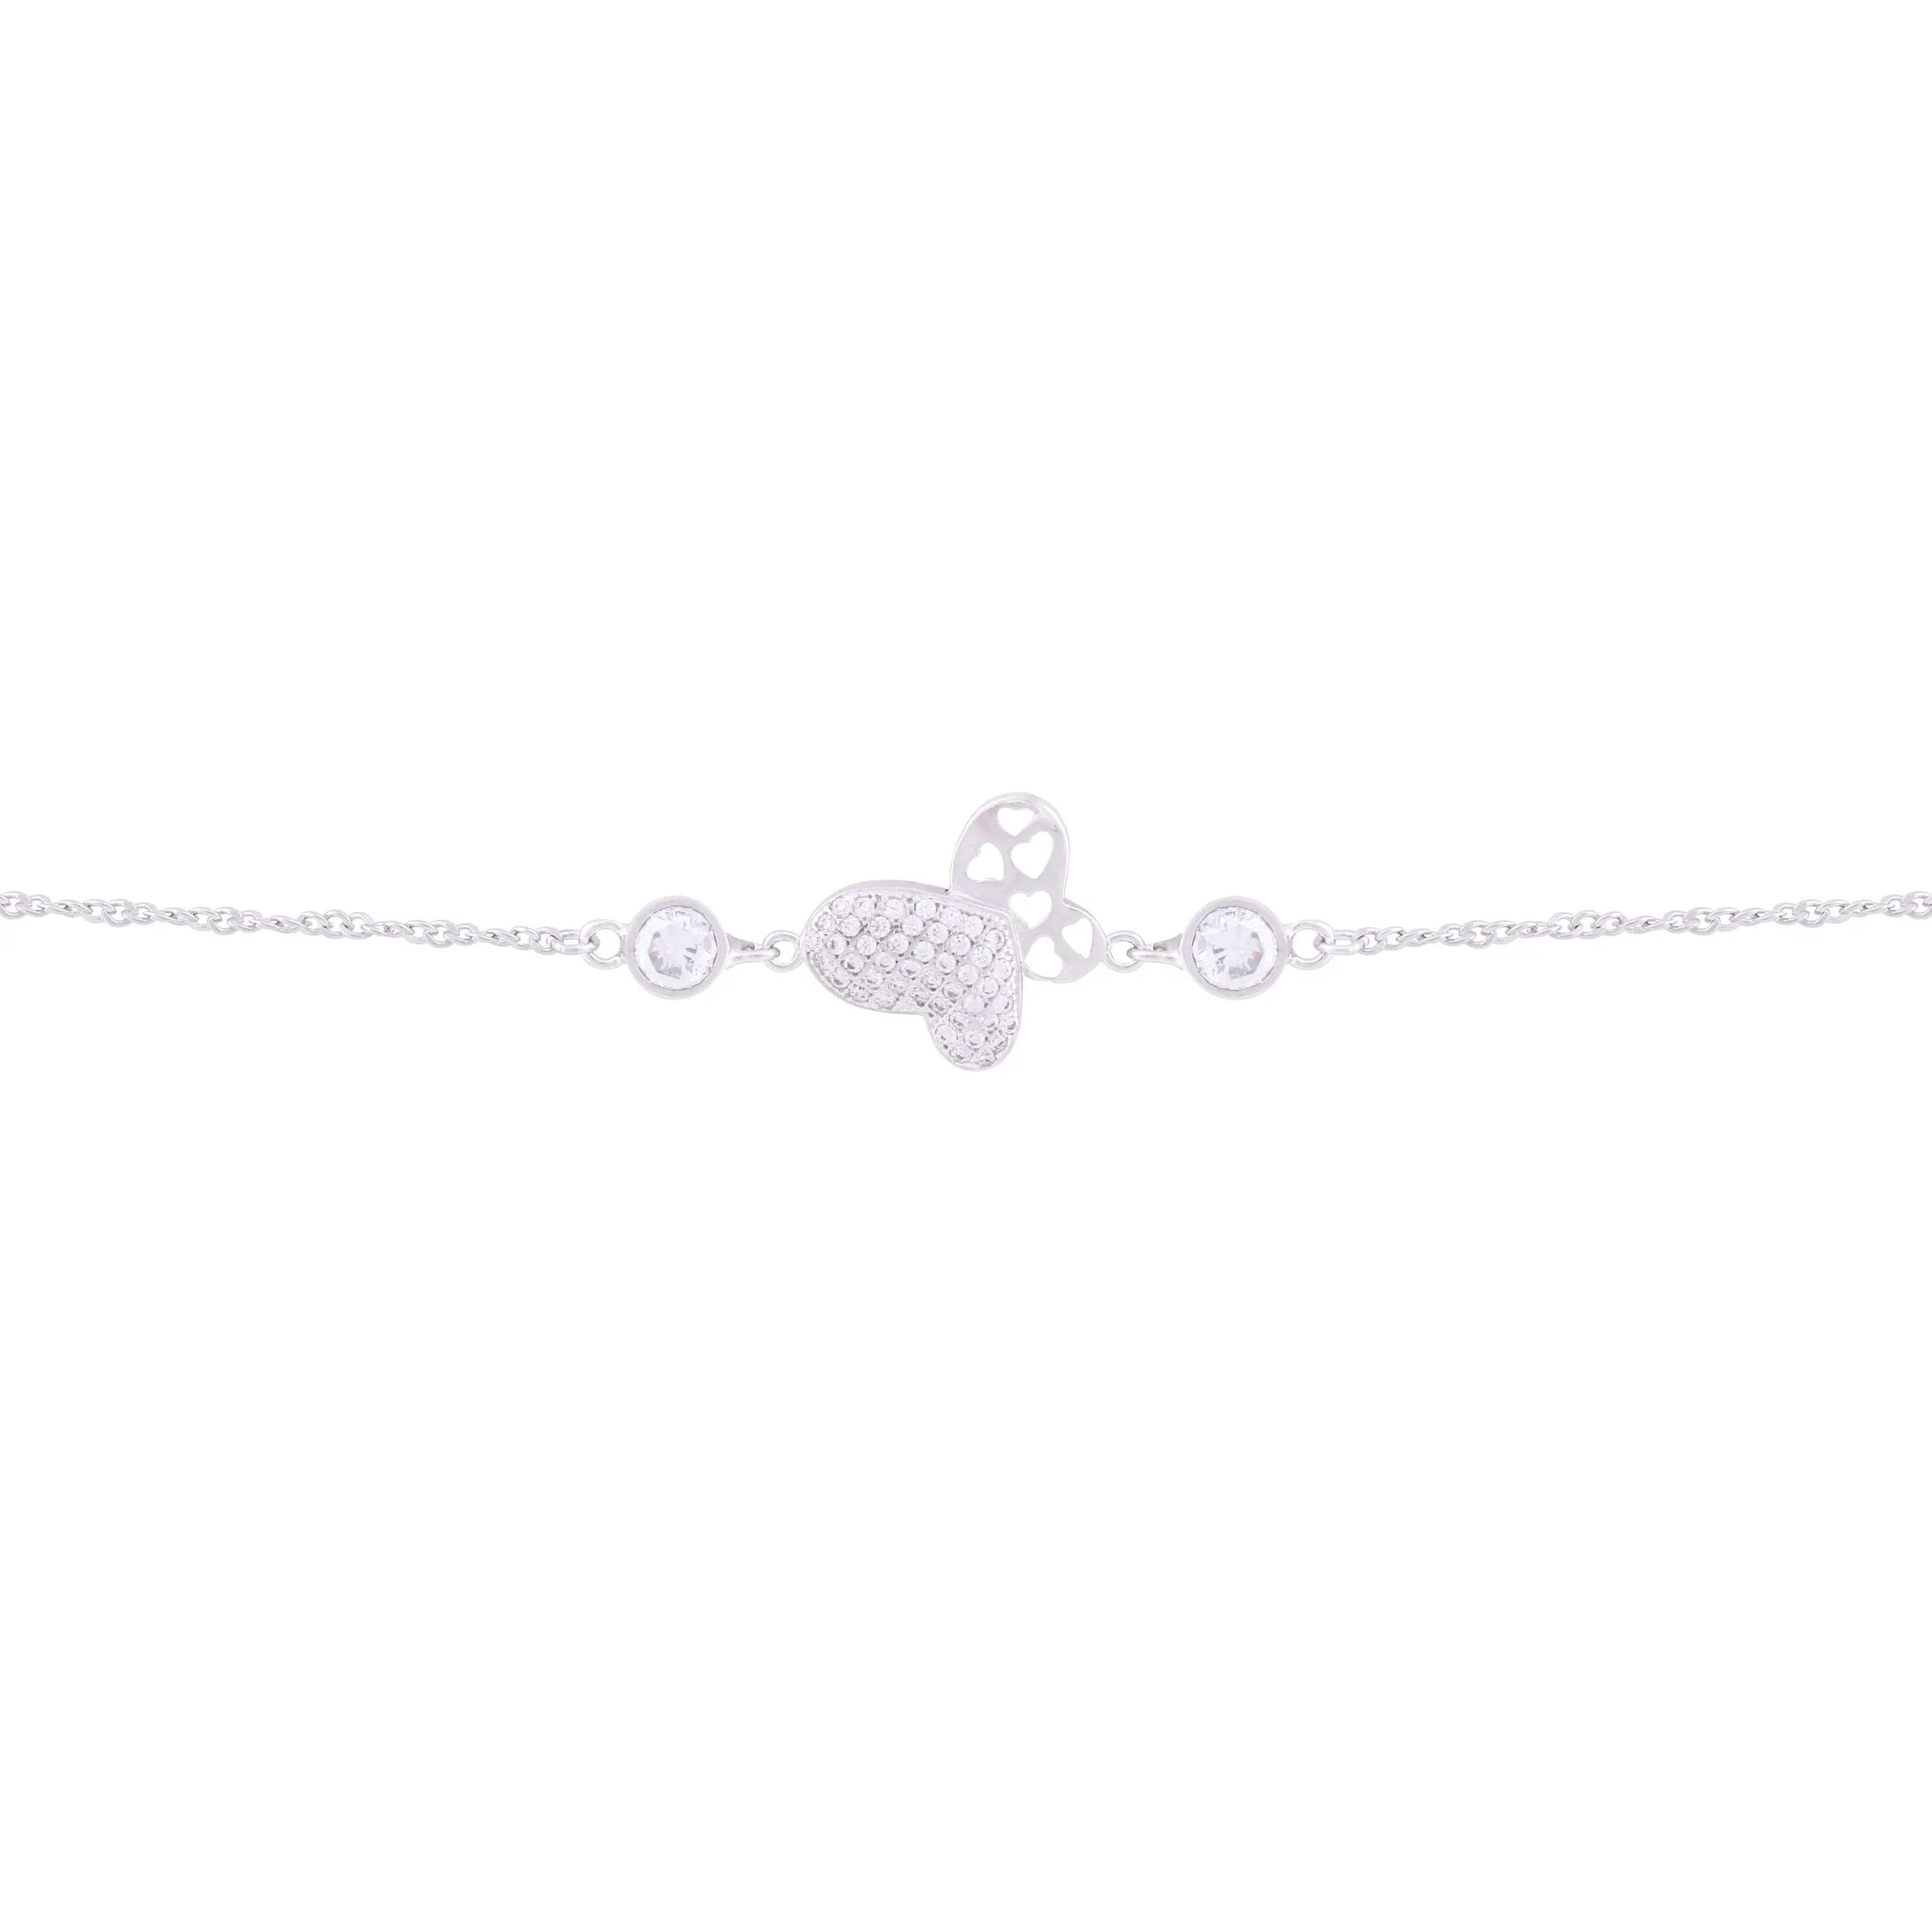 Asfour Chain Bracelet Made Of 925 Sterling Silver With A Butterfly Design, Half Of Which Is Encrusted With Zircon Stone And The Other Half Has Hollow Hearts